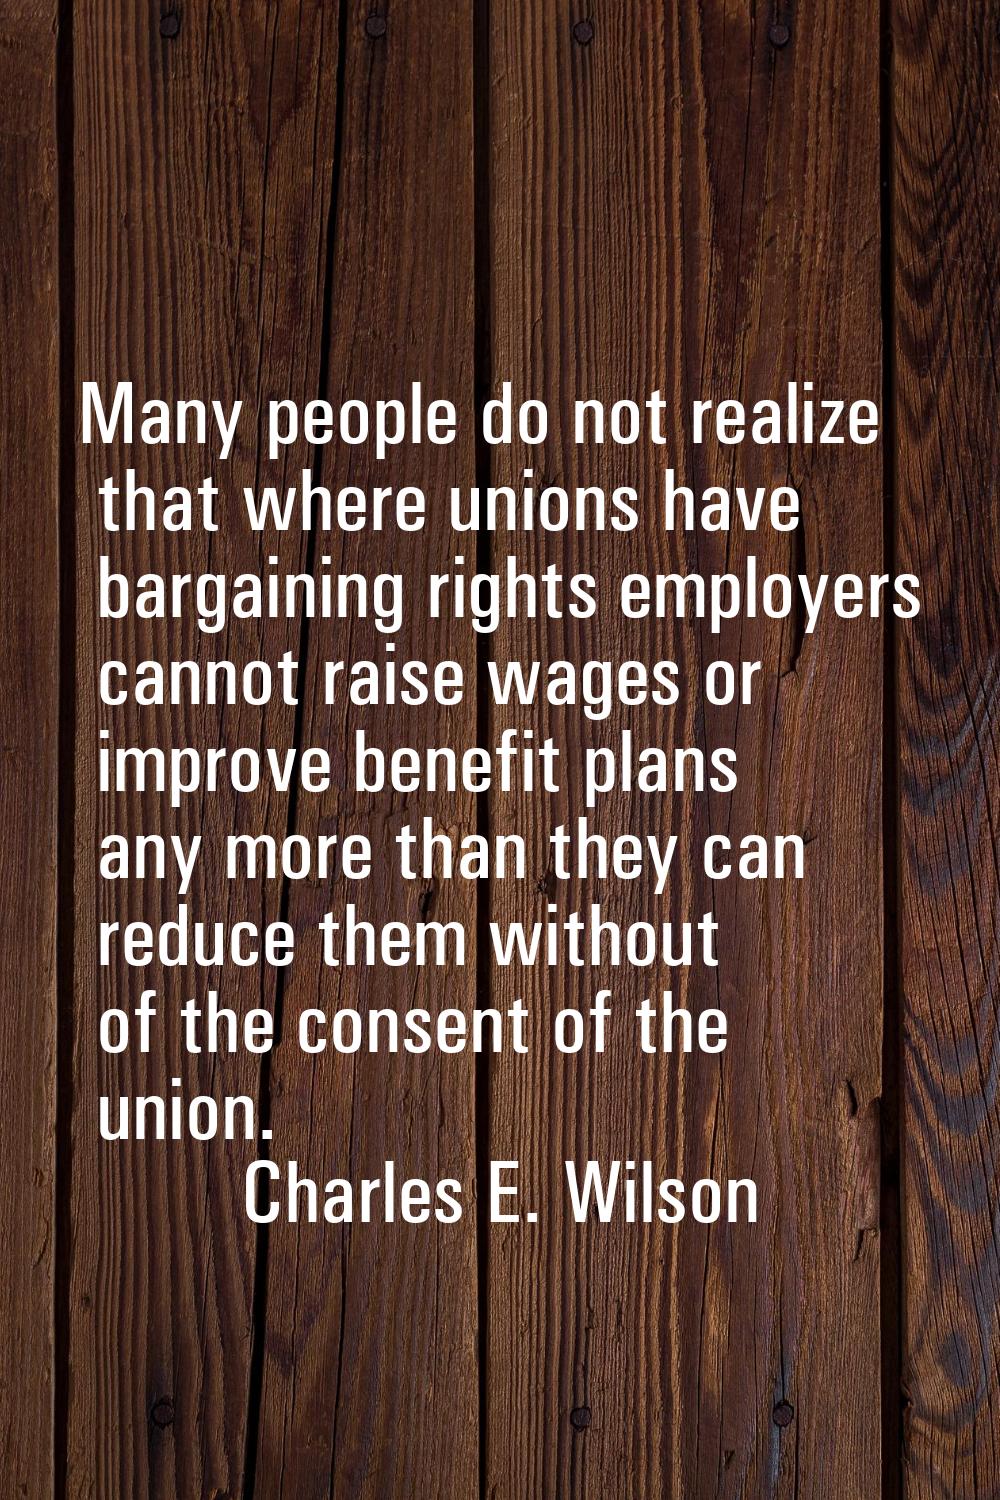 Many people do not realize that where unions have bargaining rights employers cannot raise wages or